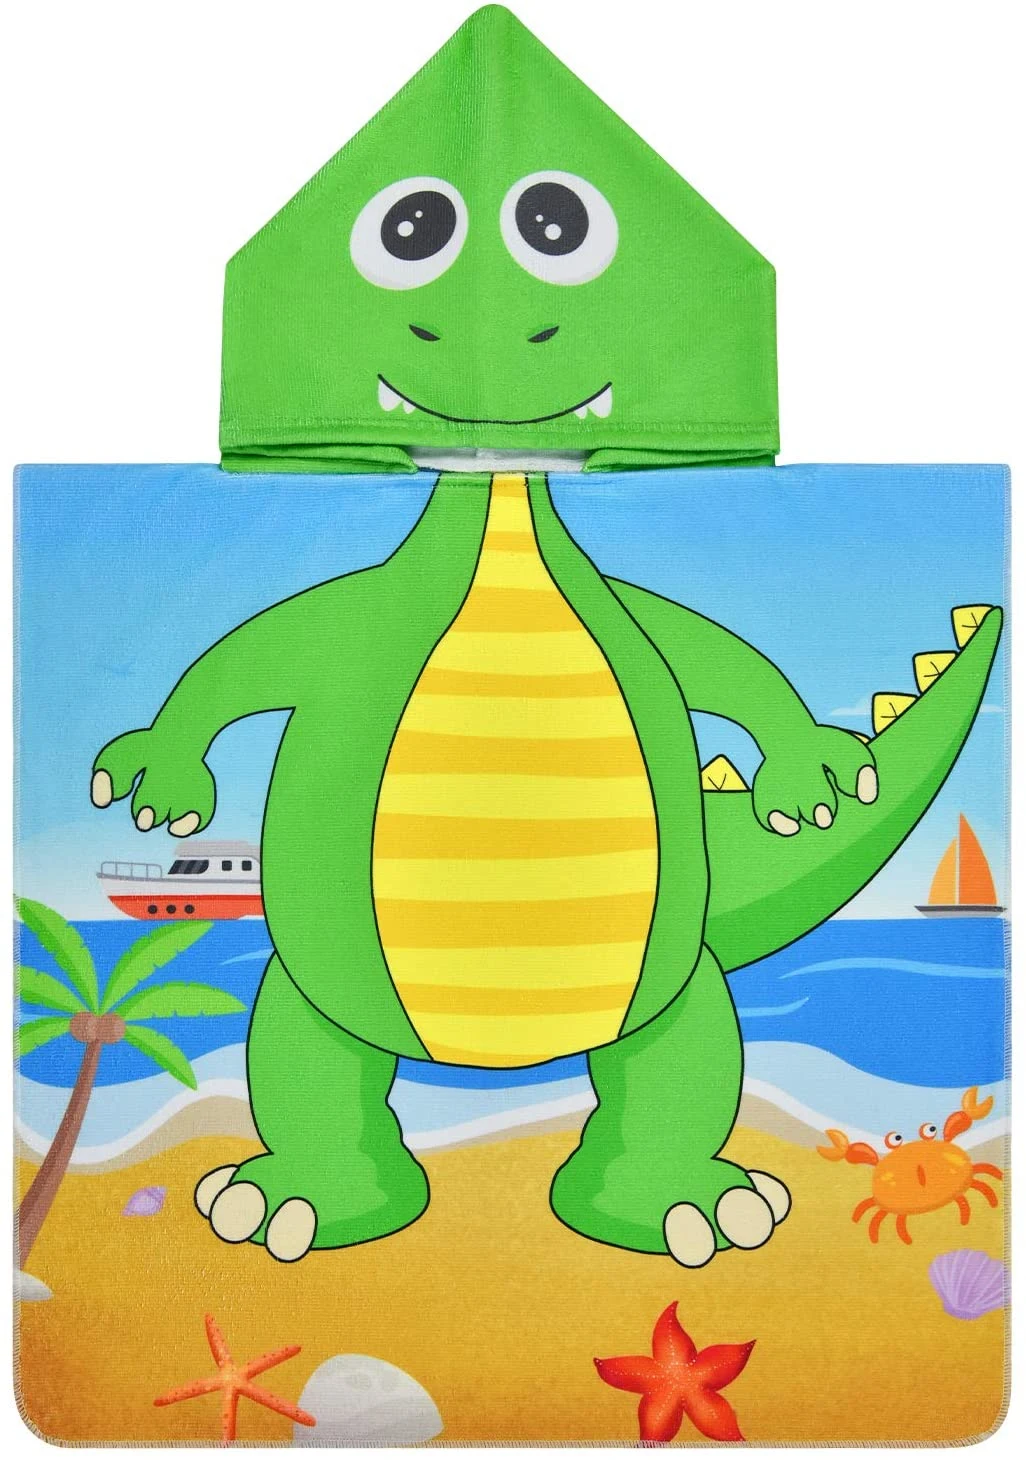 Dinosaur Kids Hooded Bath Towel, Starfish Hooded Toddler Beach Towels for Kids, Super Soft and Absorbent Hooded Towels for Toddlers, Pool, Beach, Bath, Swim